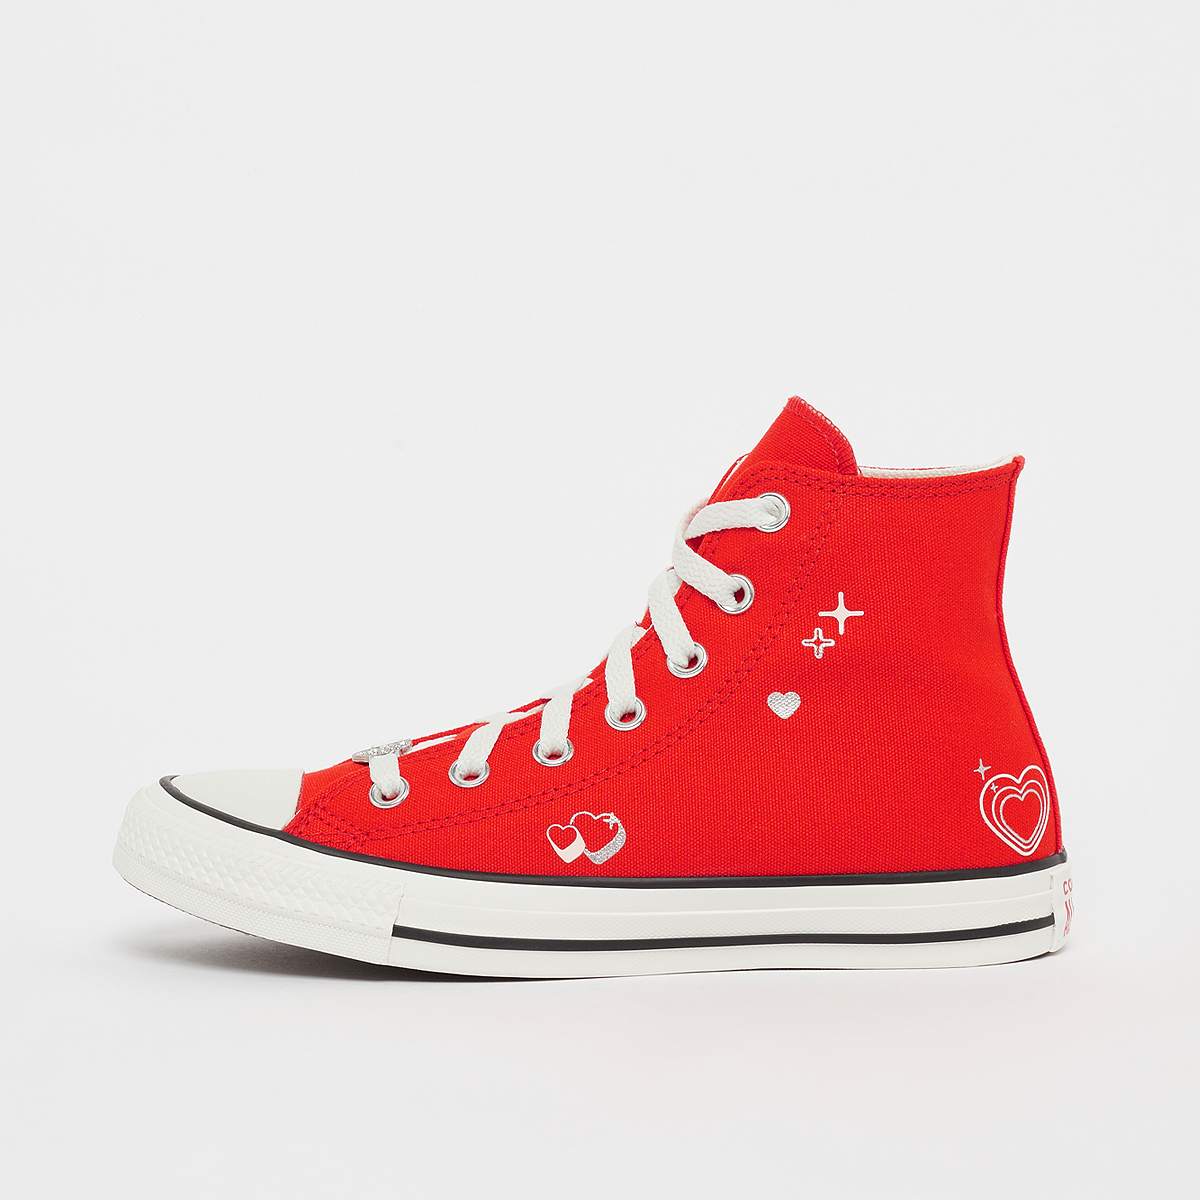 Chuck Taylor All Star, Converse, Footwear, fever dream/vintage white, taille: 39